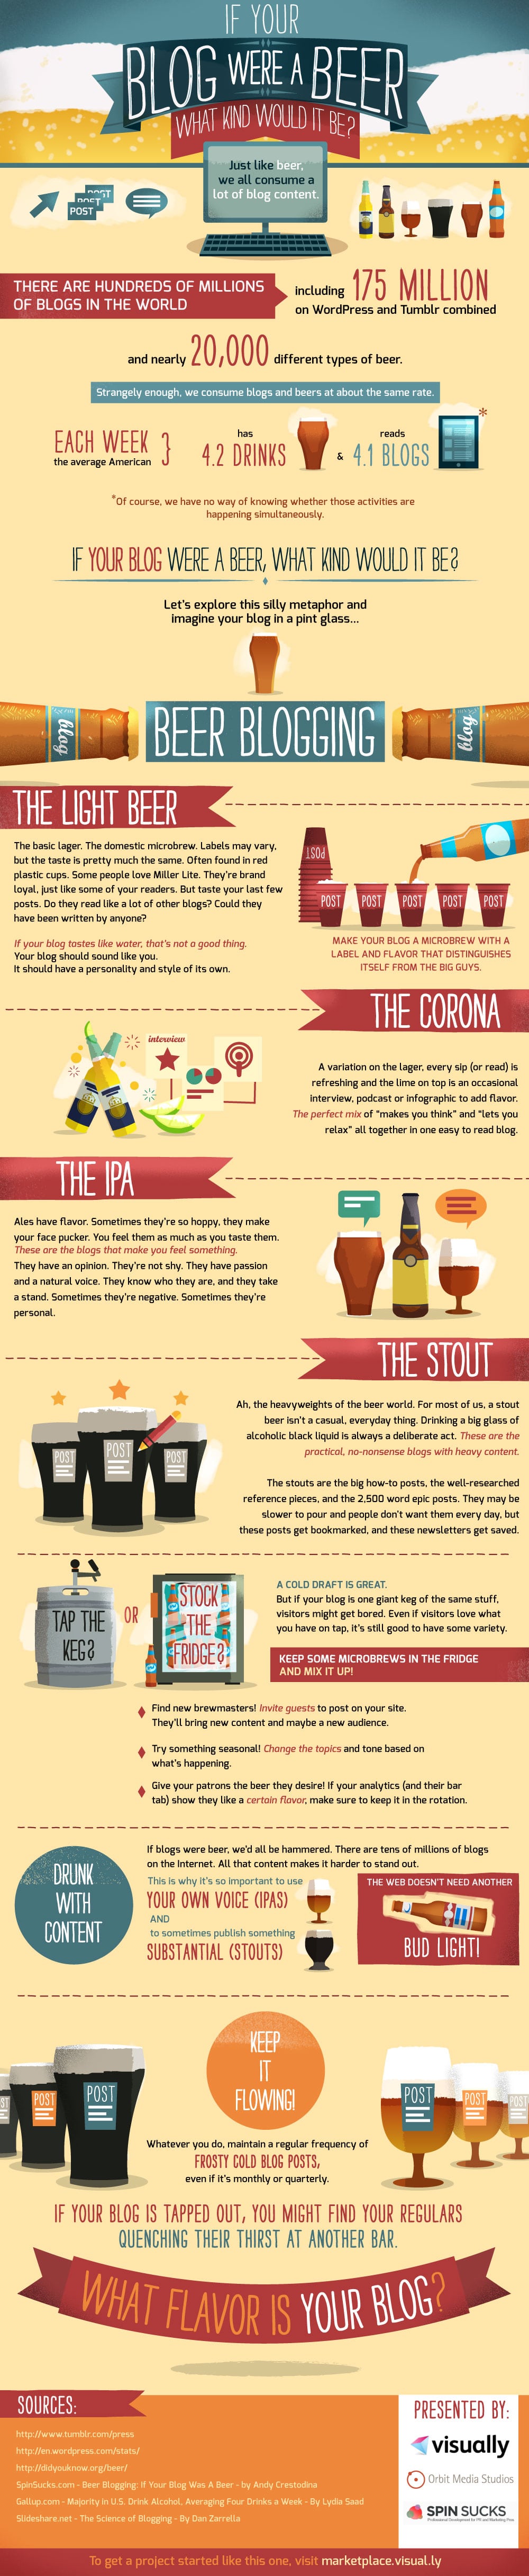 If Your Blog Were A Beer What Kind Of Beer Would It Be? [Infographic]